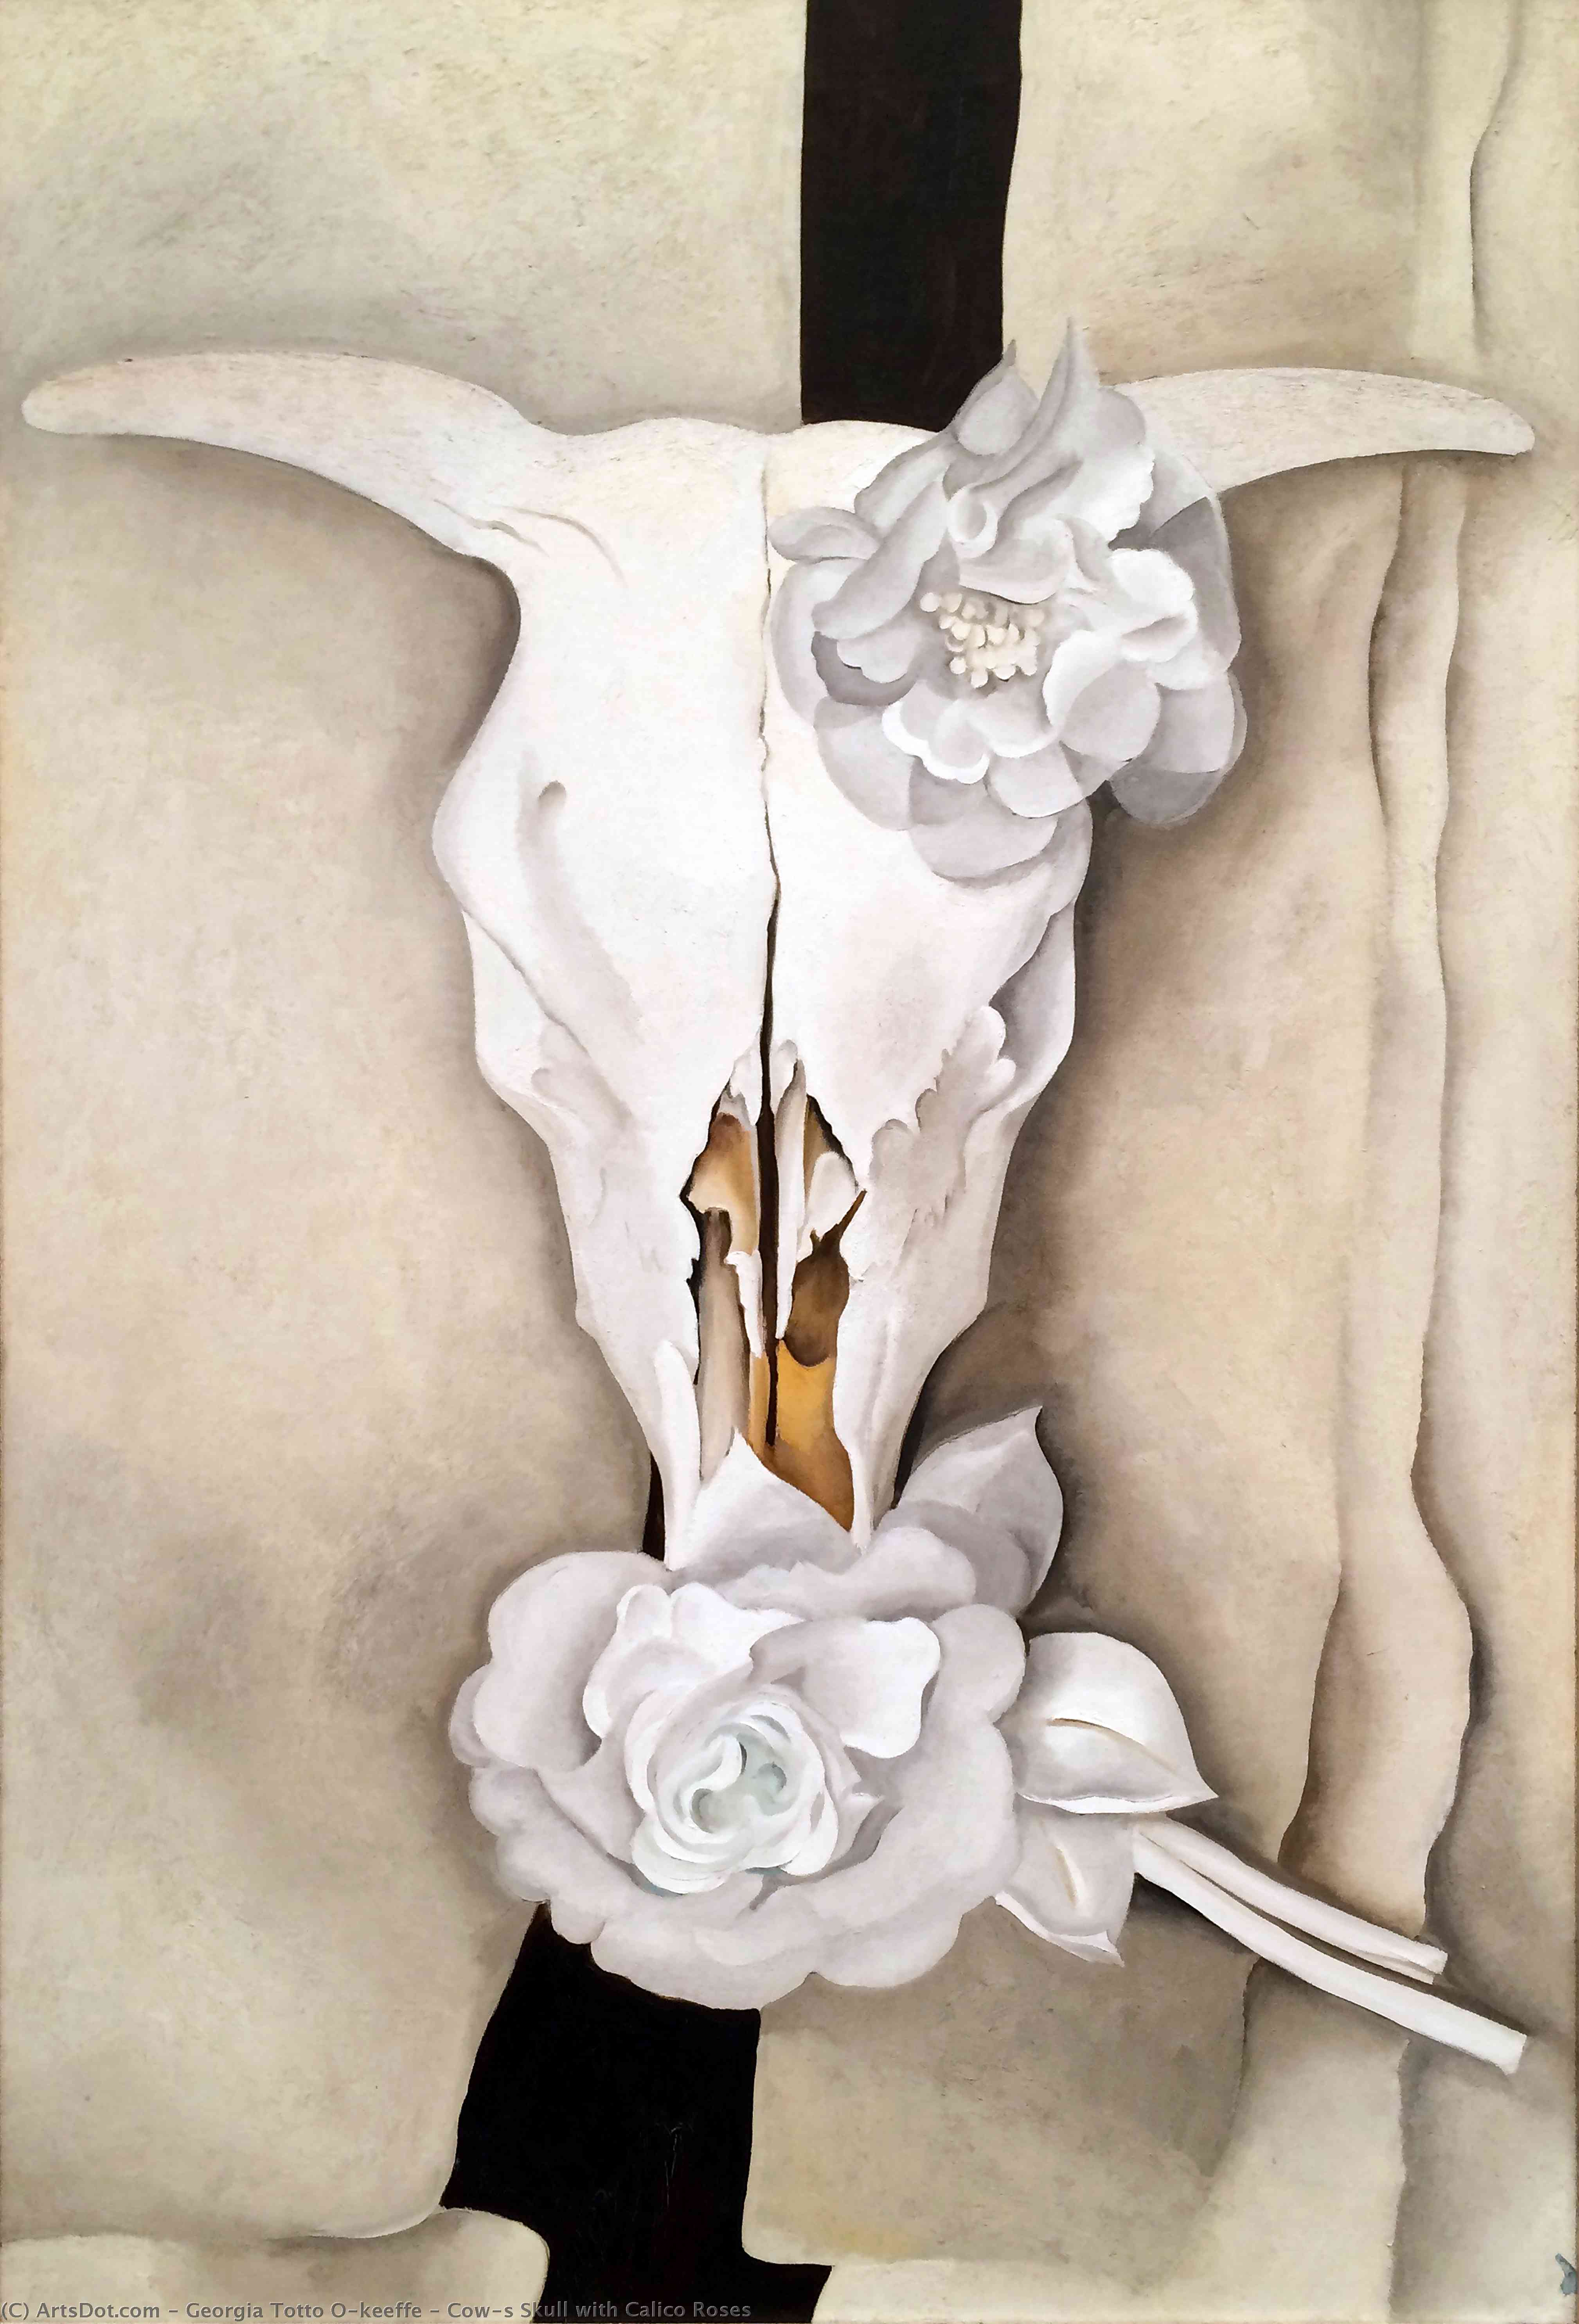 WikiOO.org - Encyclopedia of Fine Arts - Schilderen, Artwork Georgia Totto O'keeffe - Cow's Skull with Calico Roses